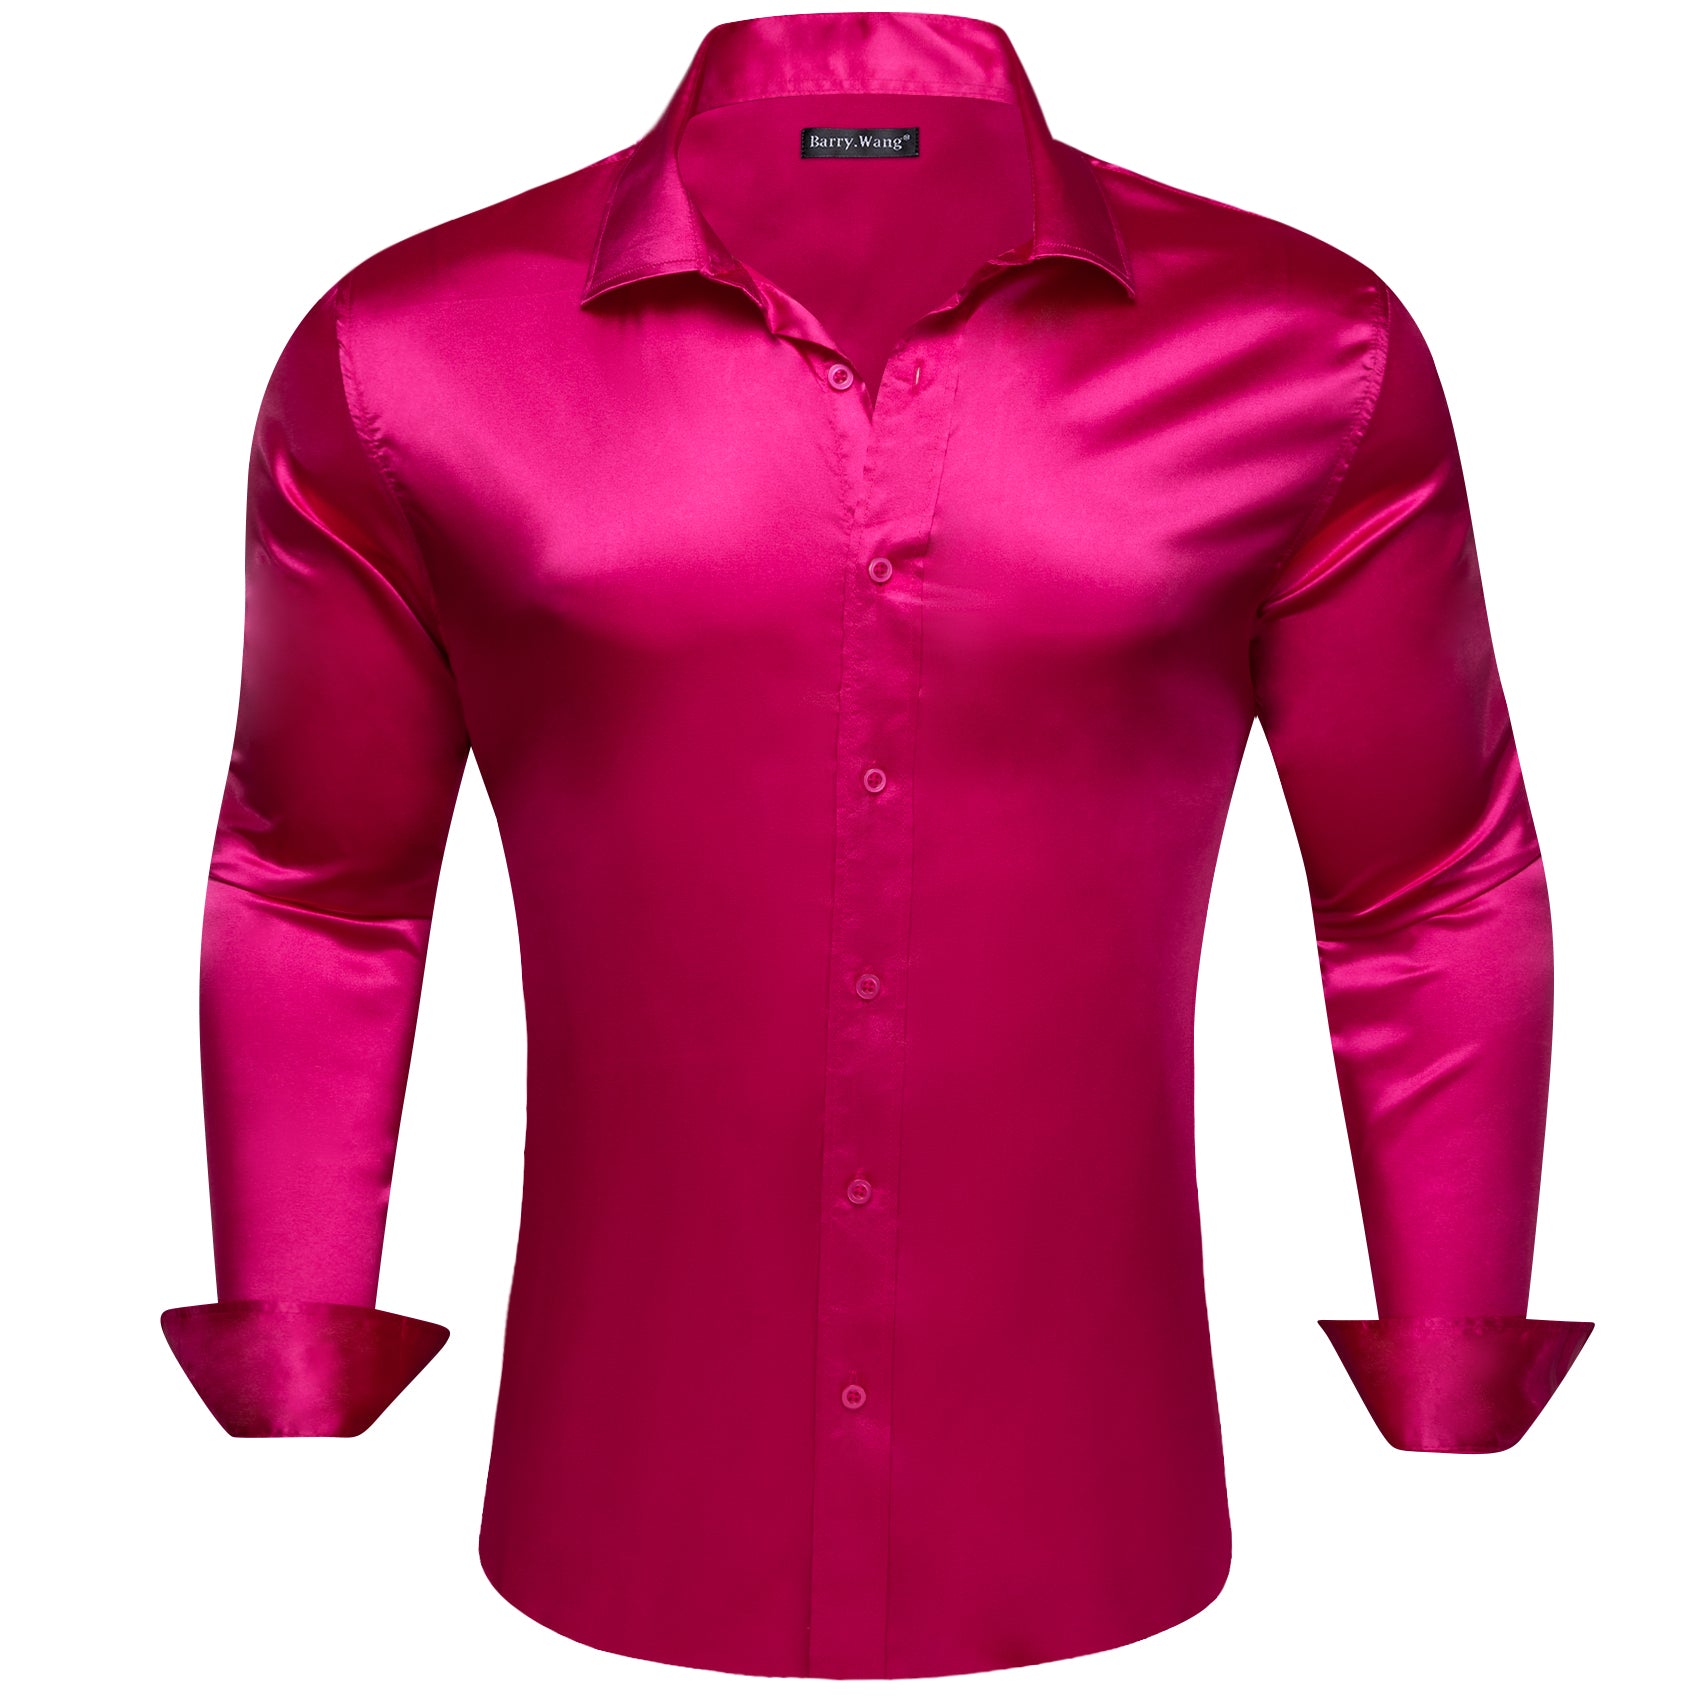 Barry.wang Red Violet Solid Silk Men's Shirt